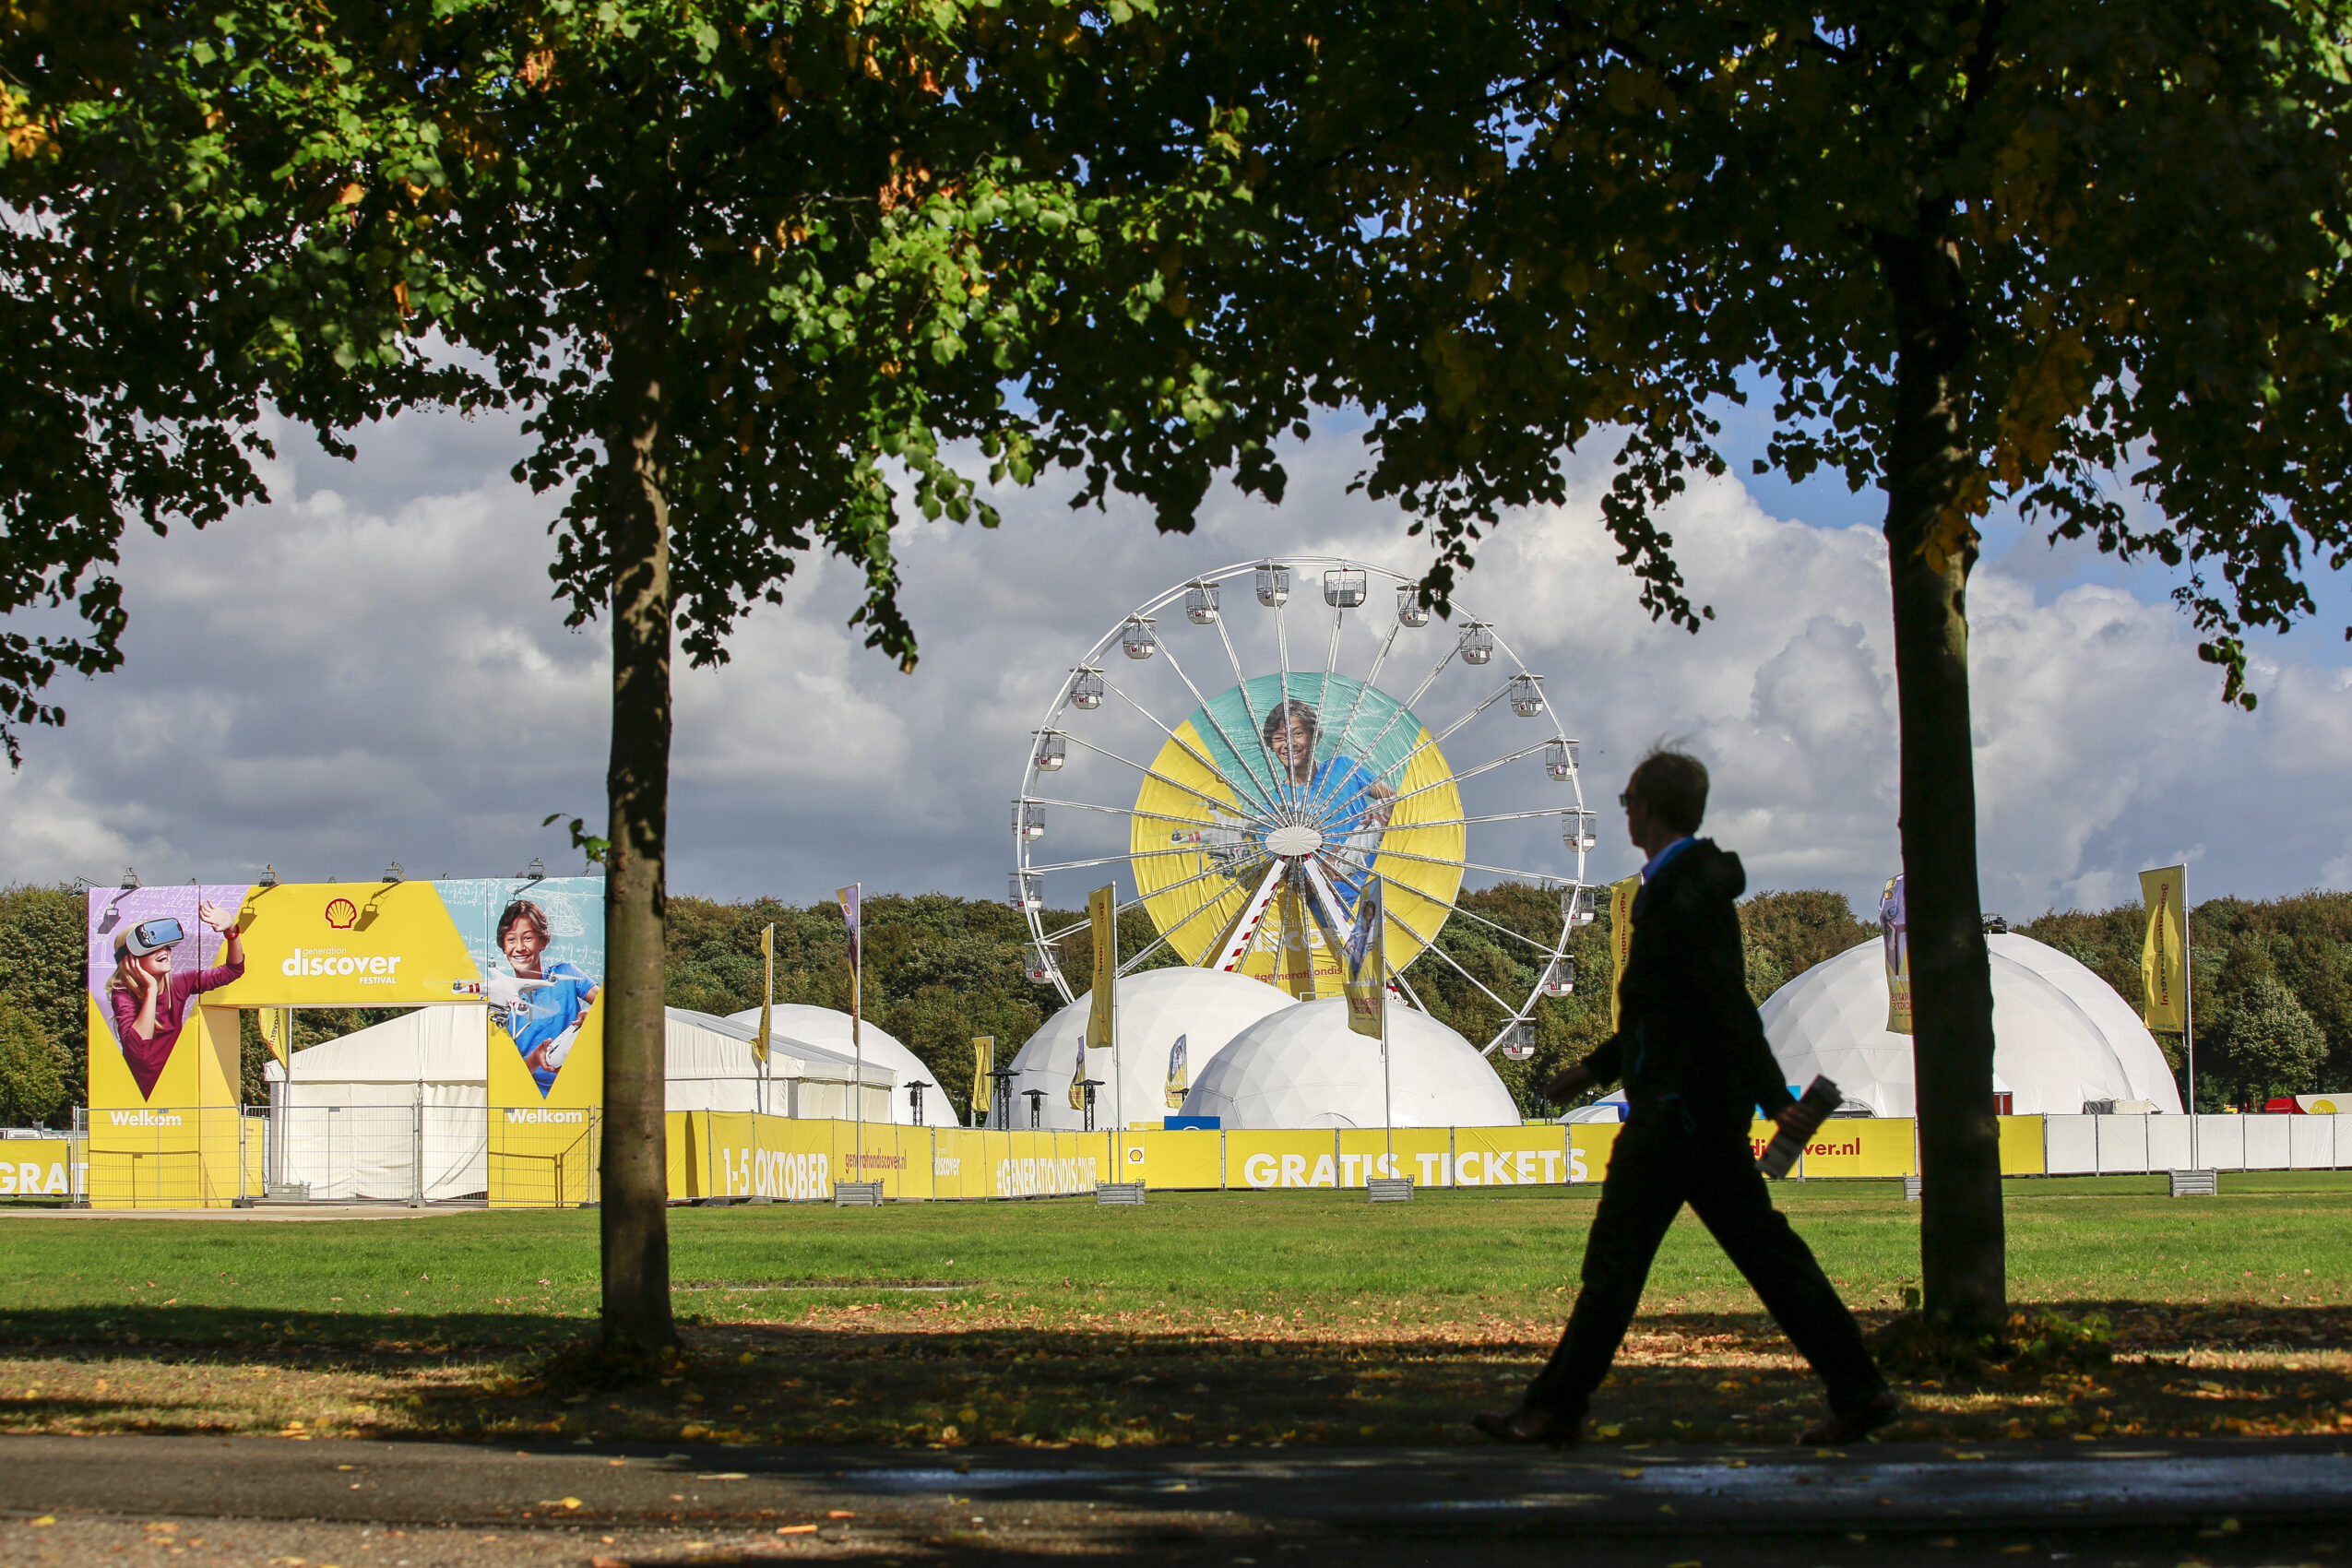 View of the venue of Generation Discover festival at Malieveld in The Hague, Netherlands, 2016 Jiri Buller/AP images for Shell.